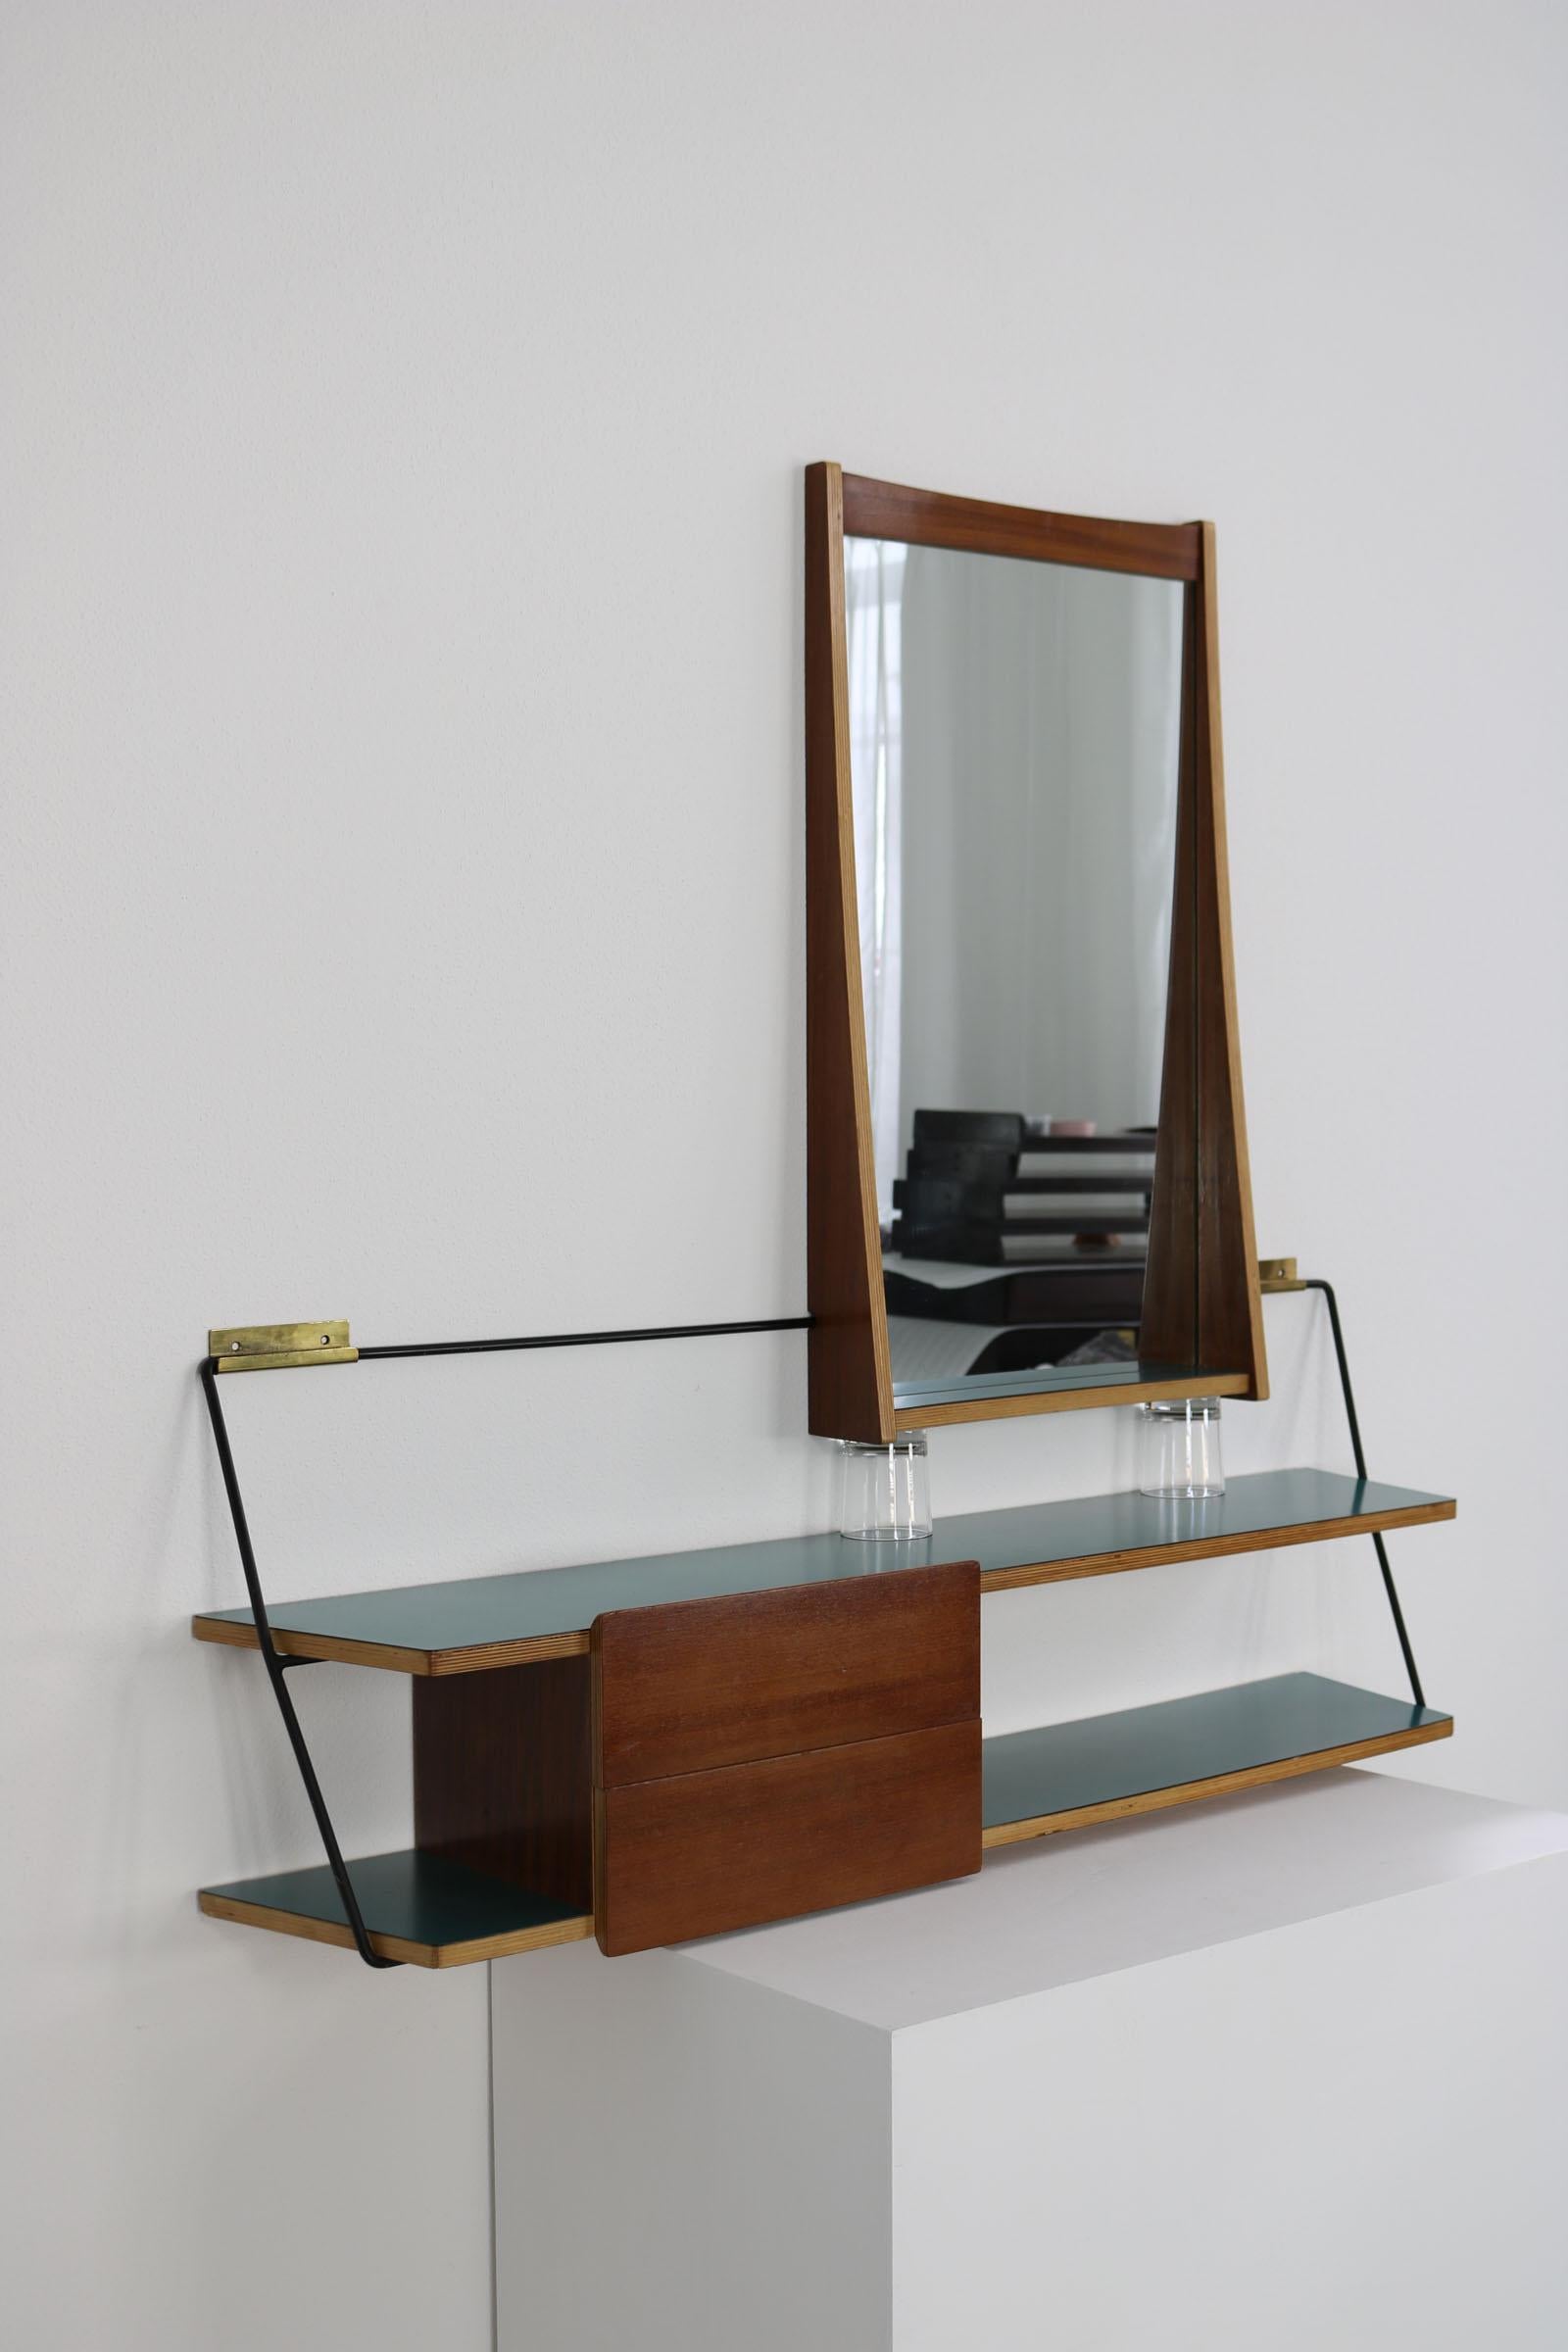 This Italian set, consisting of a mirror and a console, dates from the 1950s and was designed by Eugenia Alberti Reggio. The rectangular mirror is framed by teak. The console is also made of teak, the surfaces were lacquered olive green and the iron